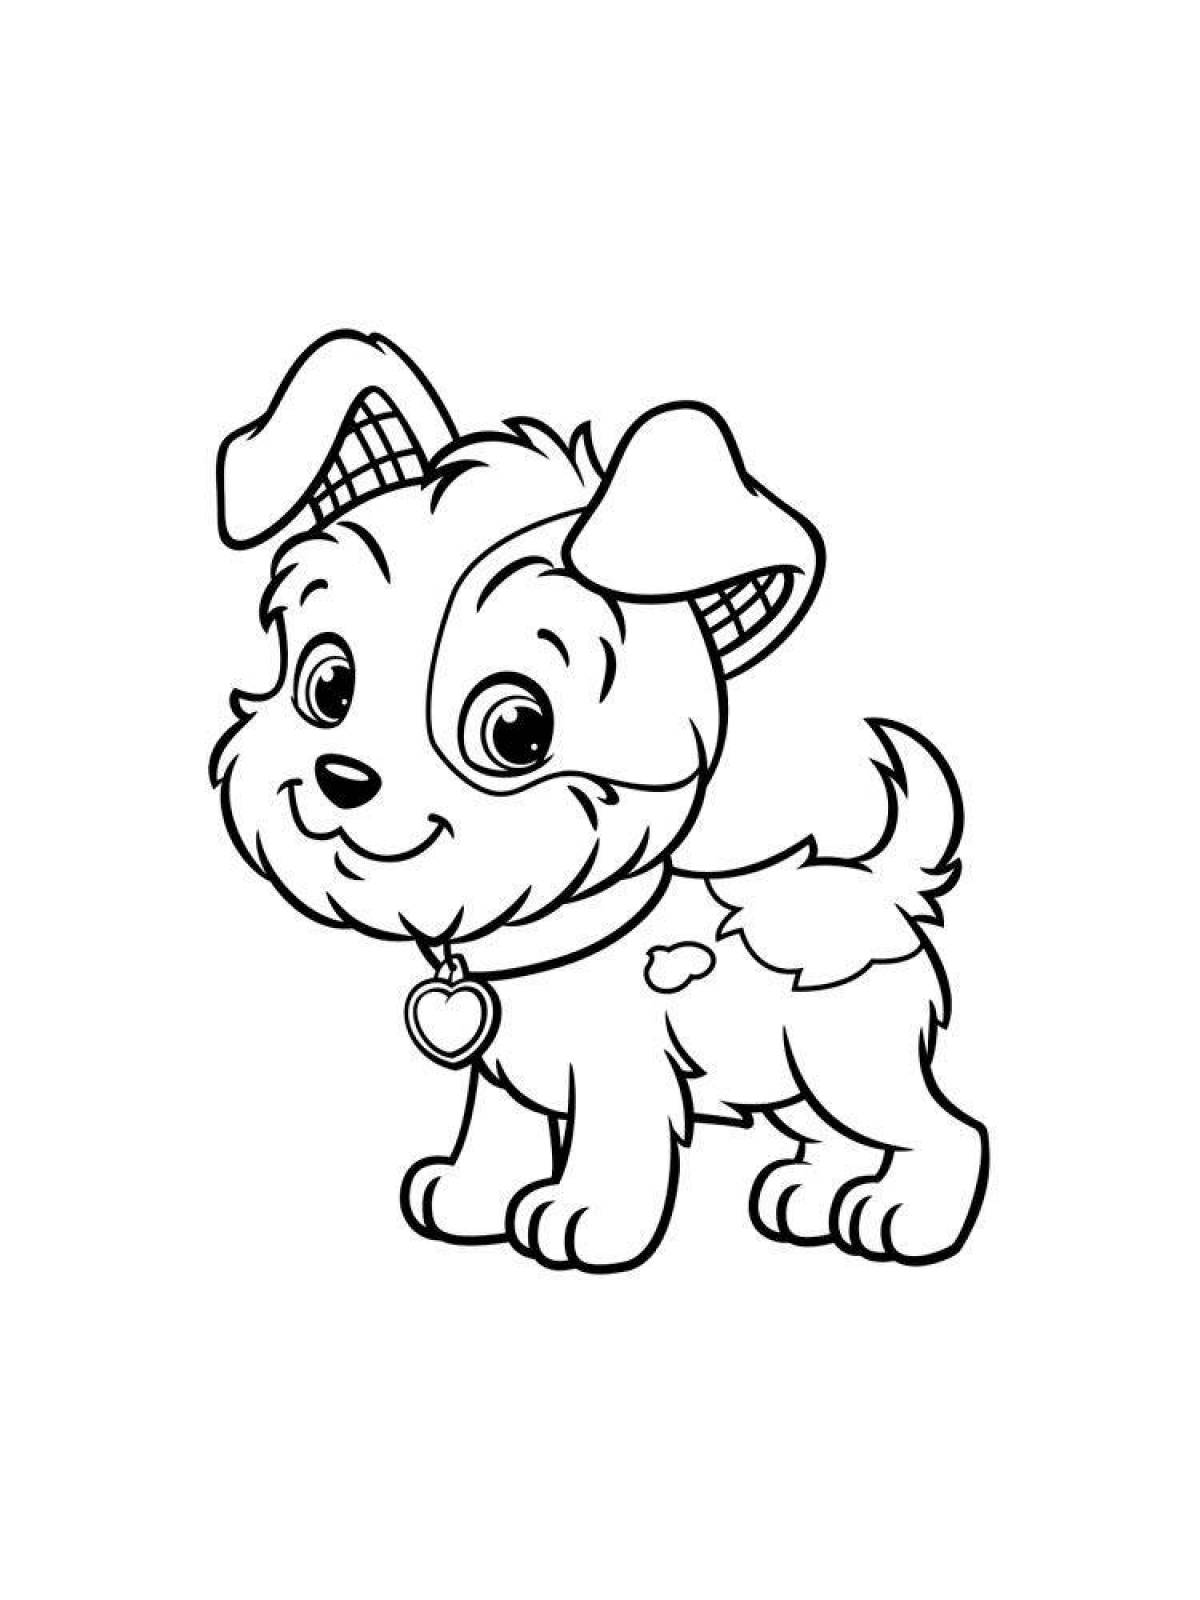 Coloring page loving dog